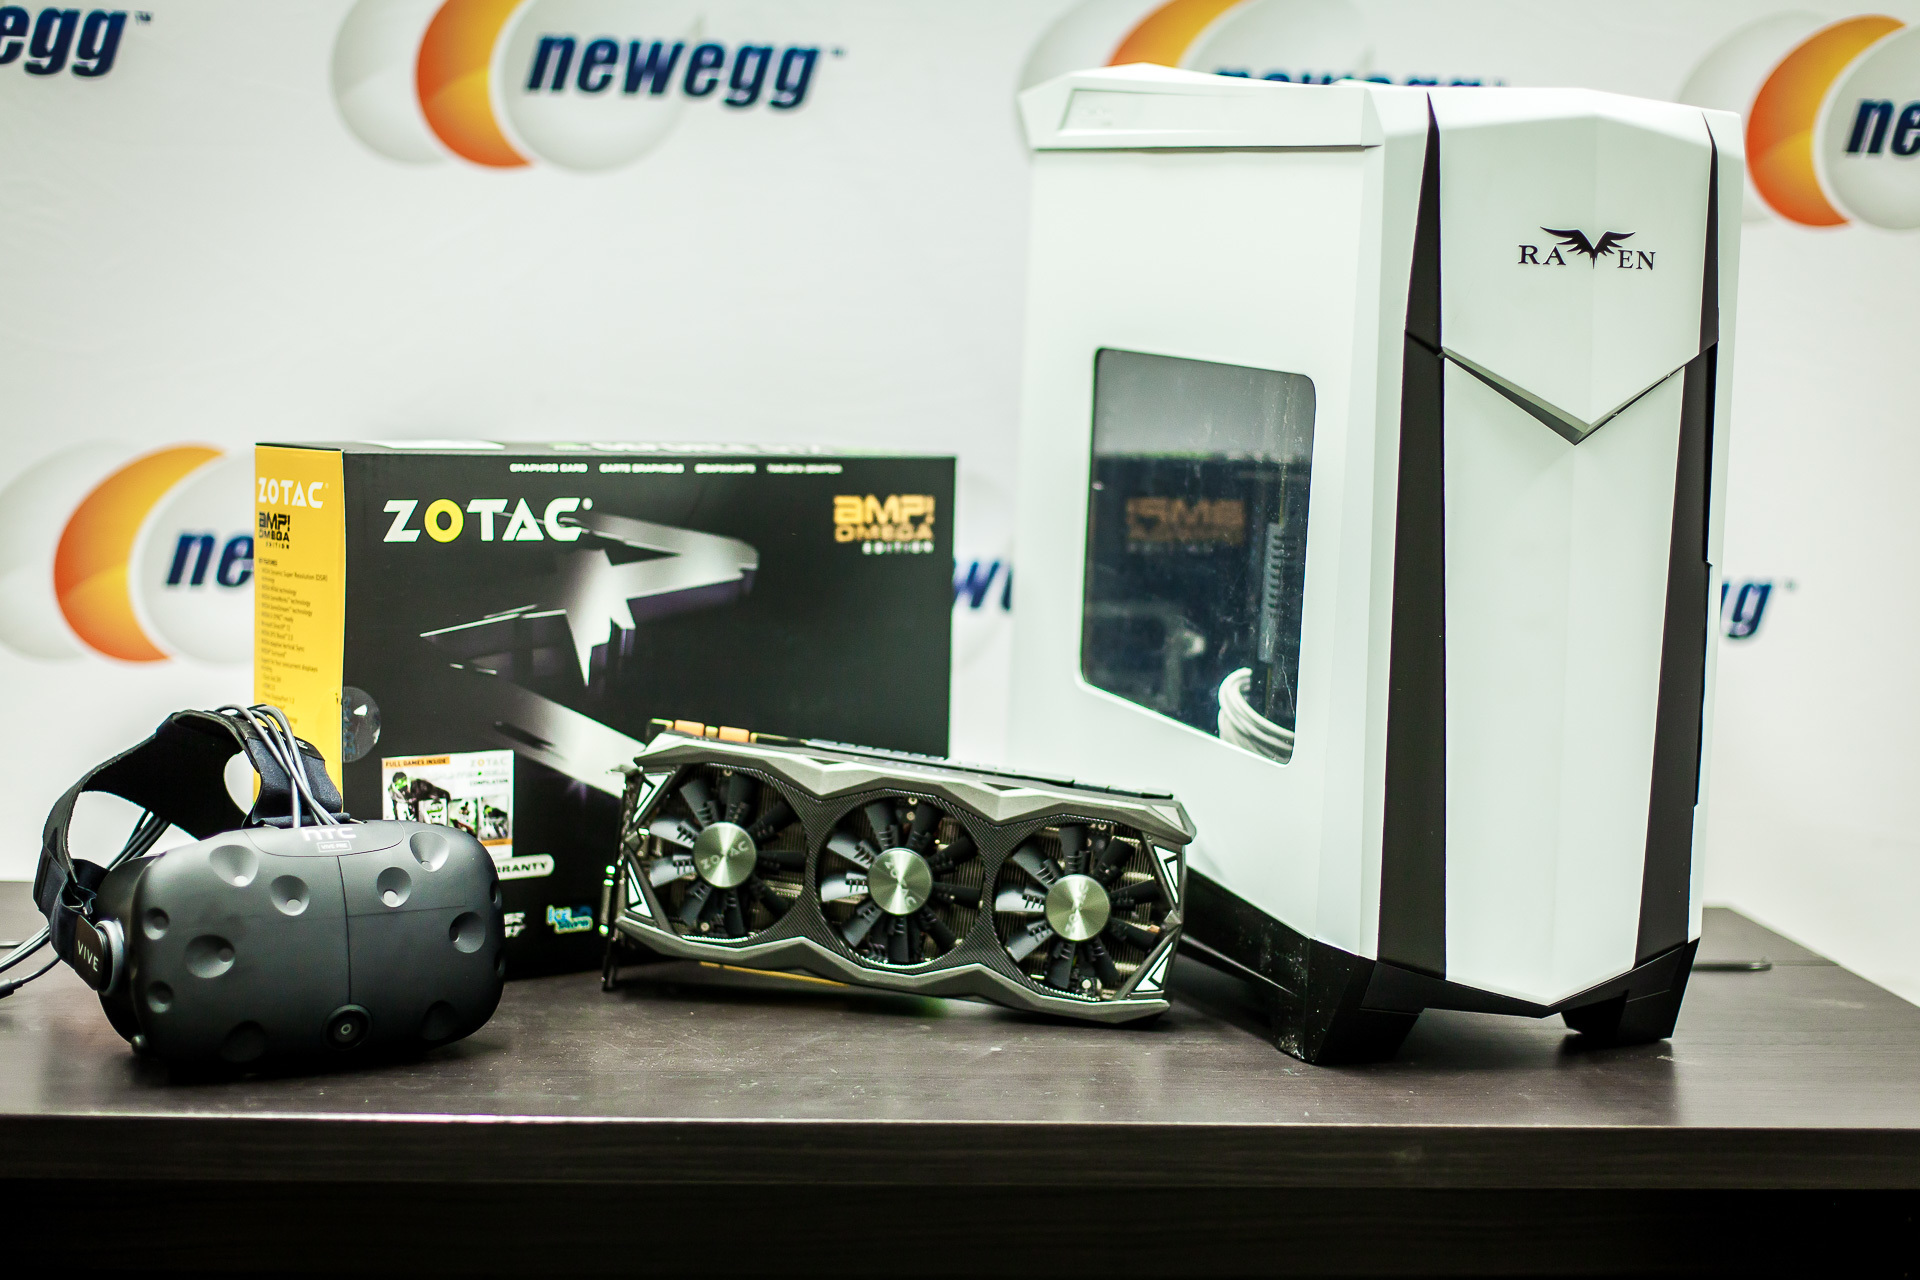 Can Your PC Virtual Reality? - Newegg.com